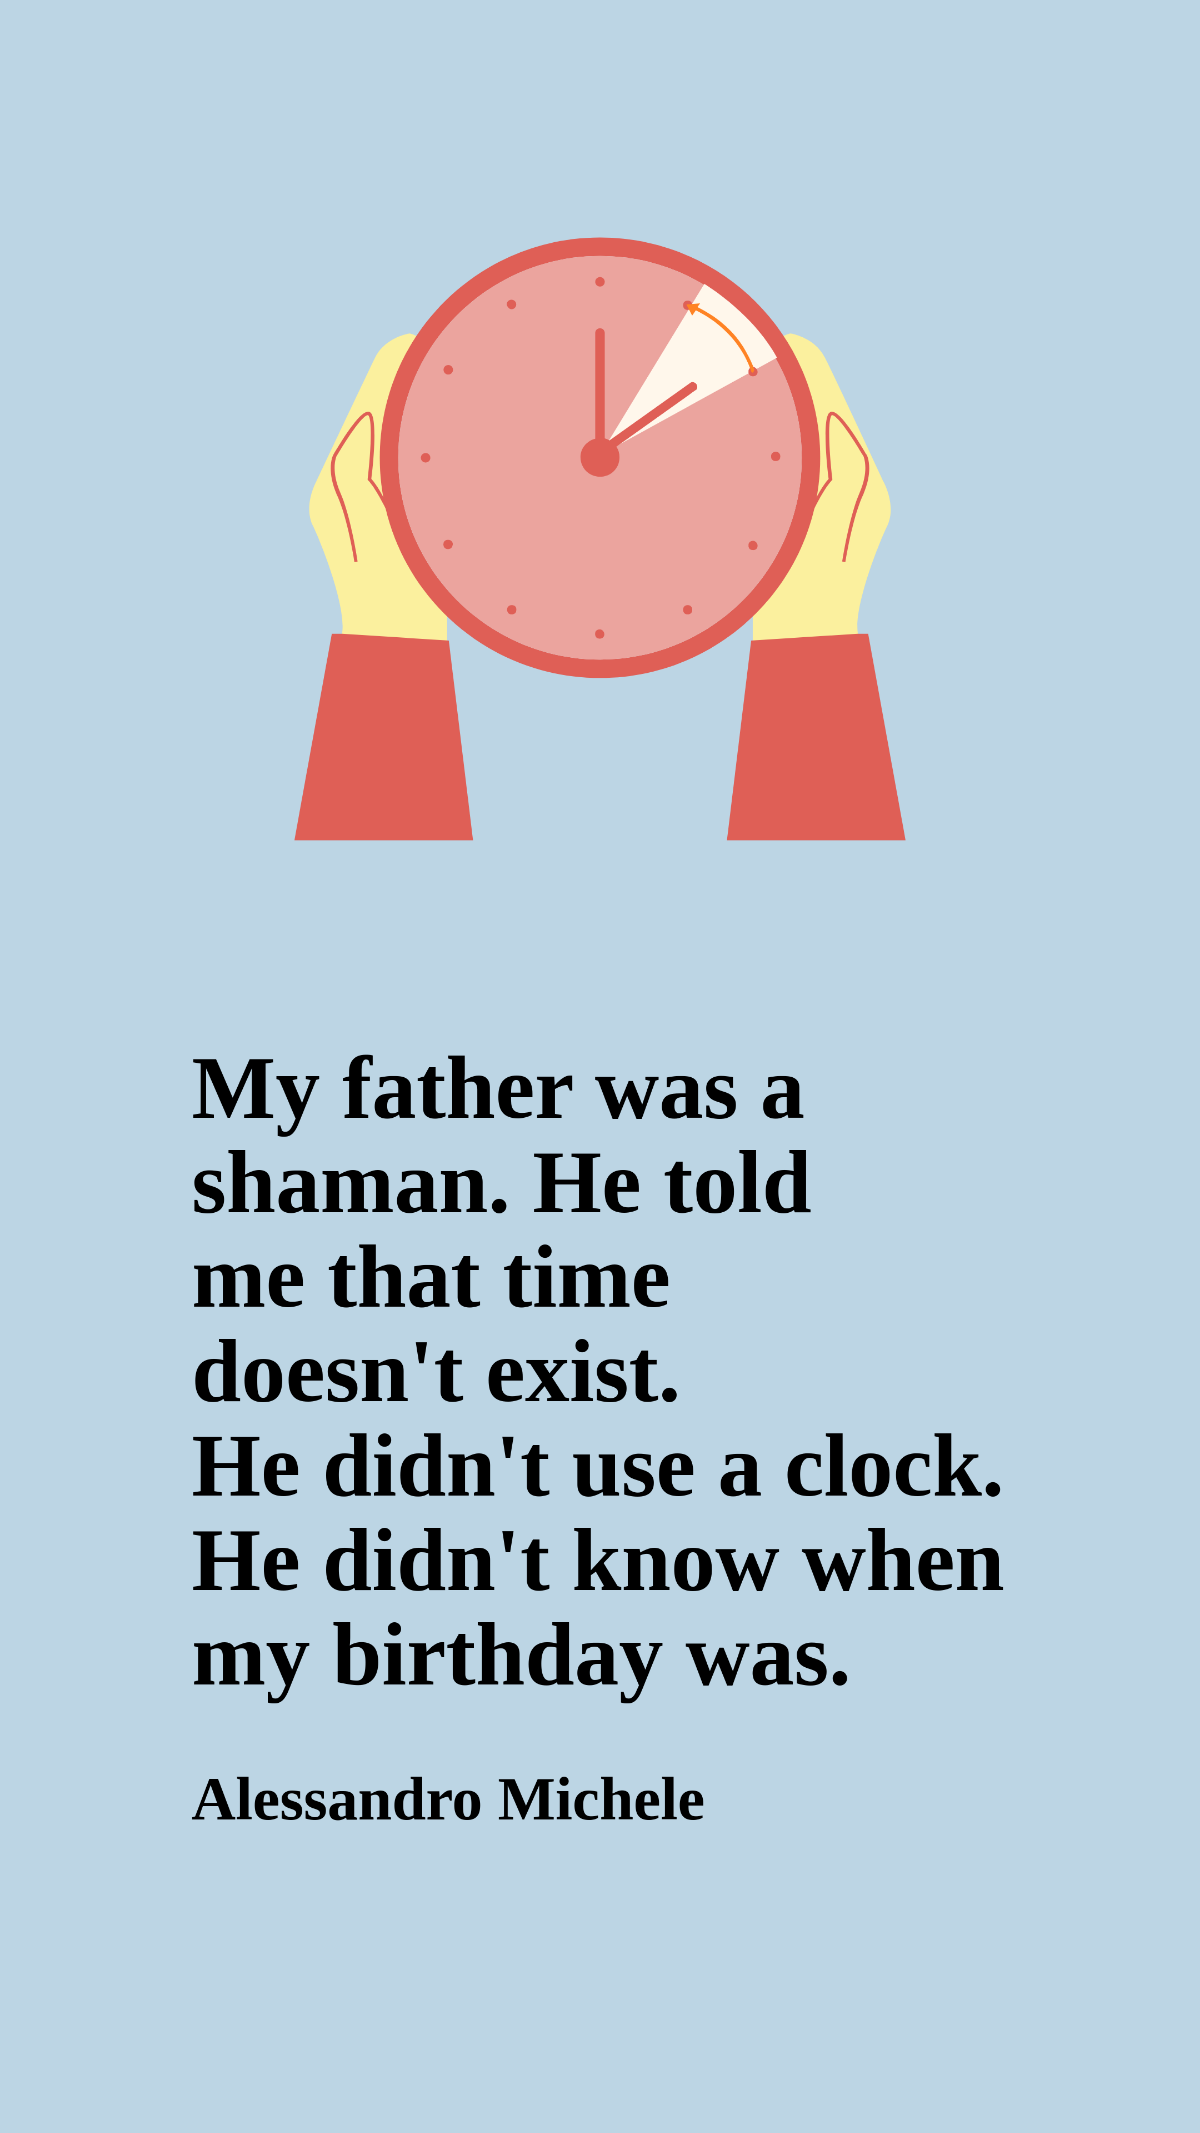 Alessandro Michele - My father was a shaman. He told me that time doesn't exist. He didn't use a clock. He didn't know when my birthday was. Template